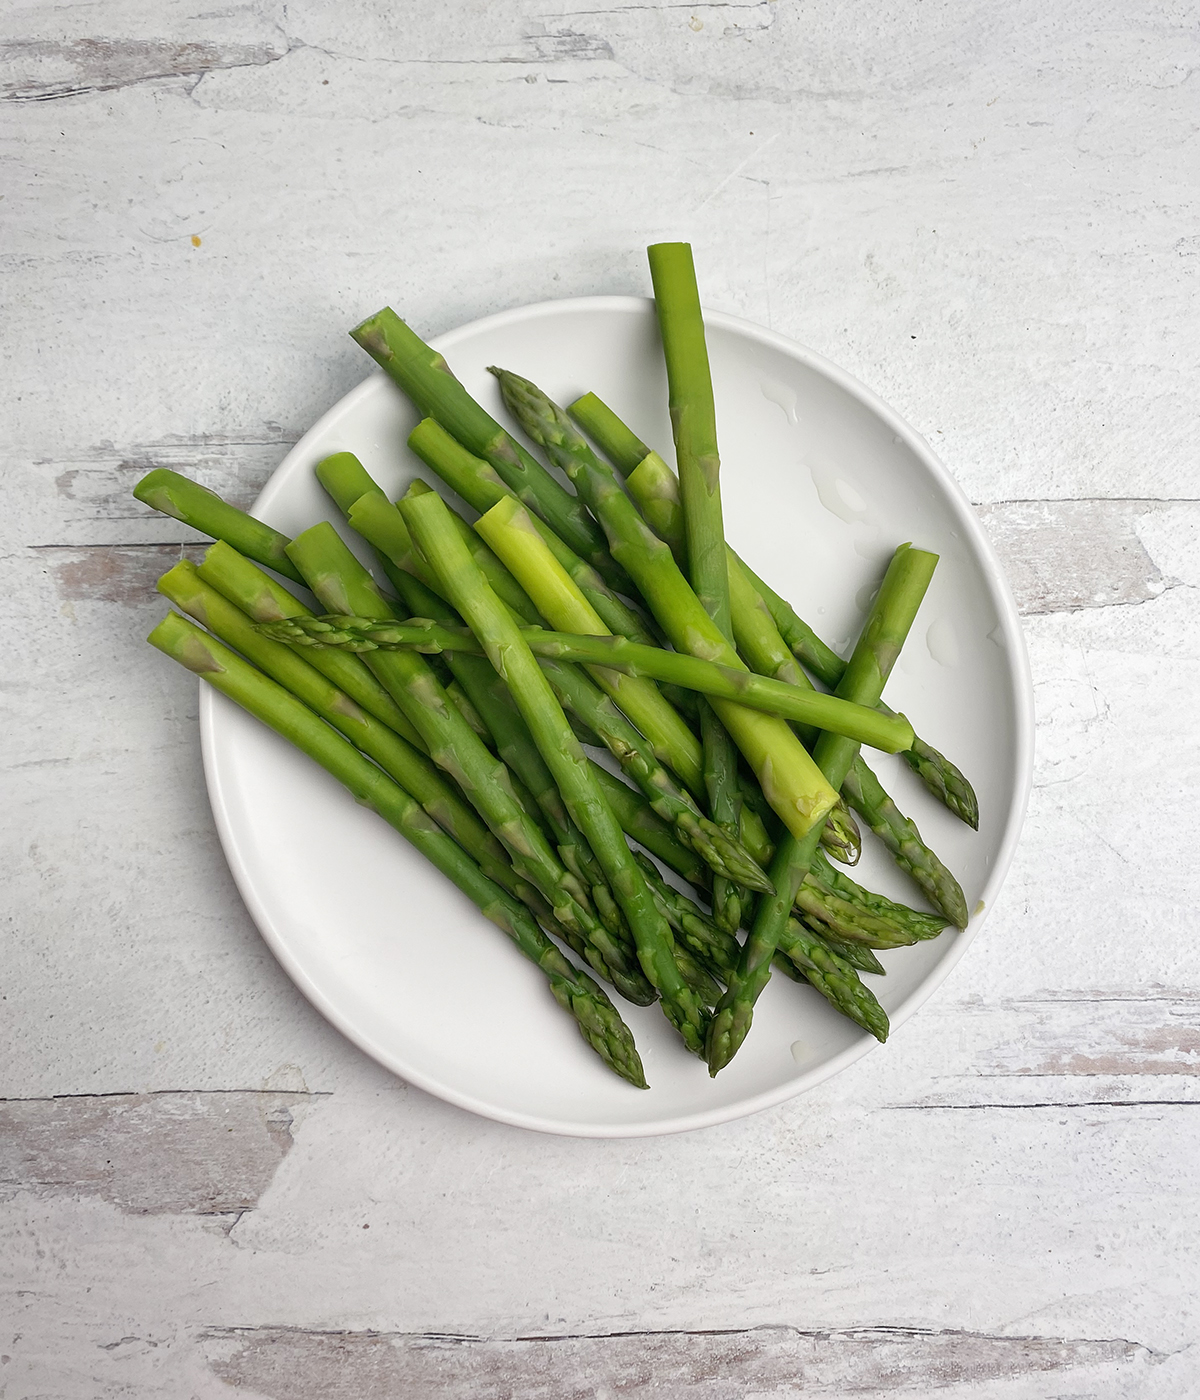 Cooked asparagus on a plate.